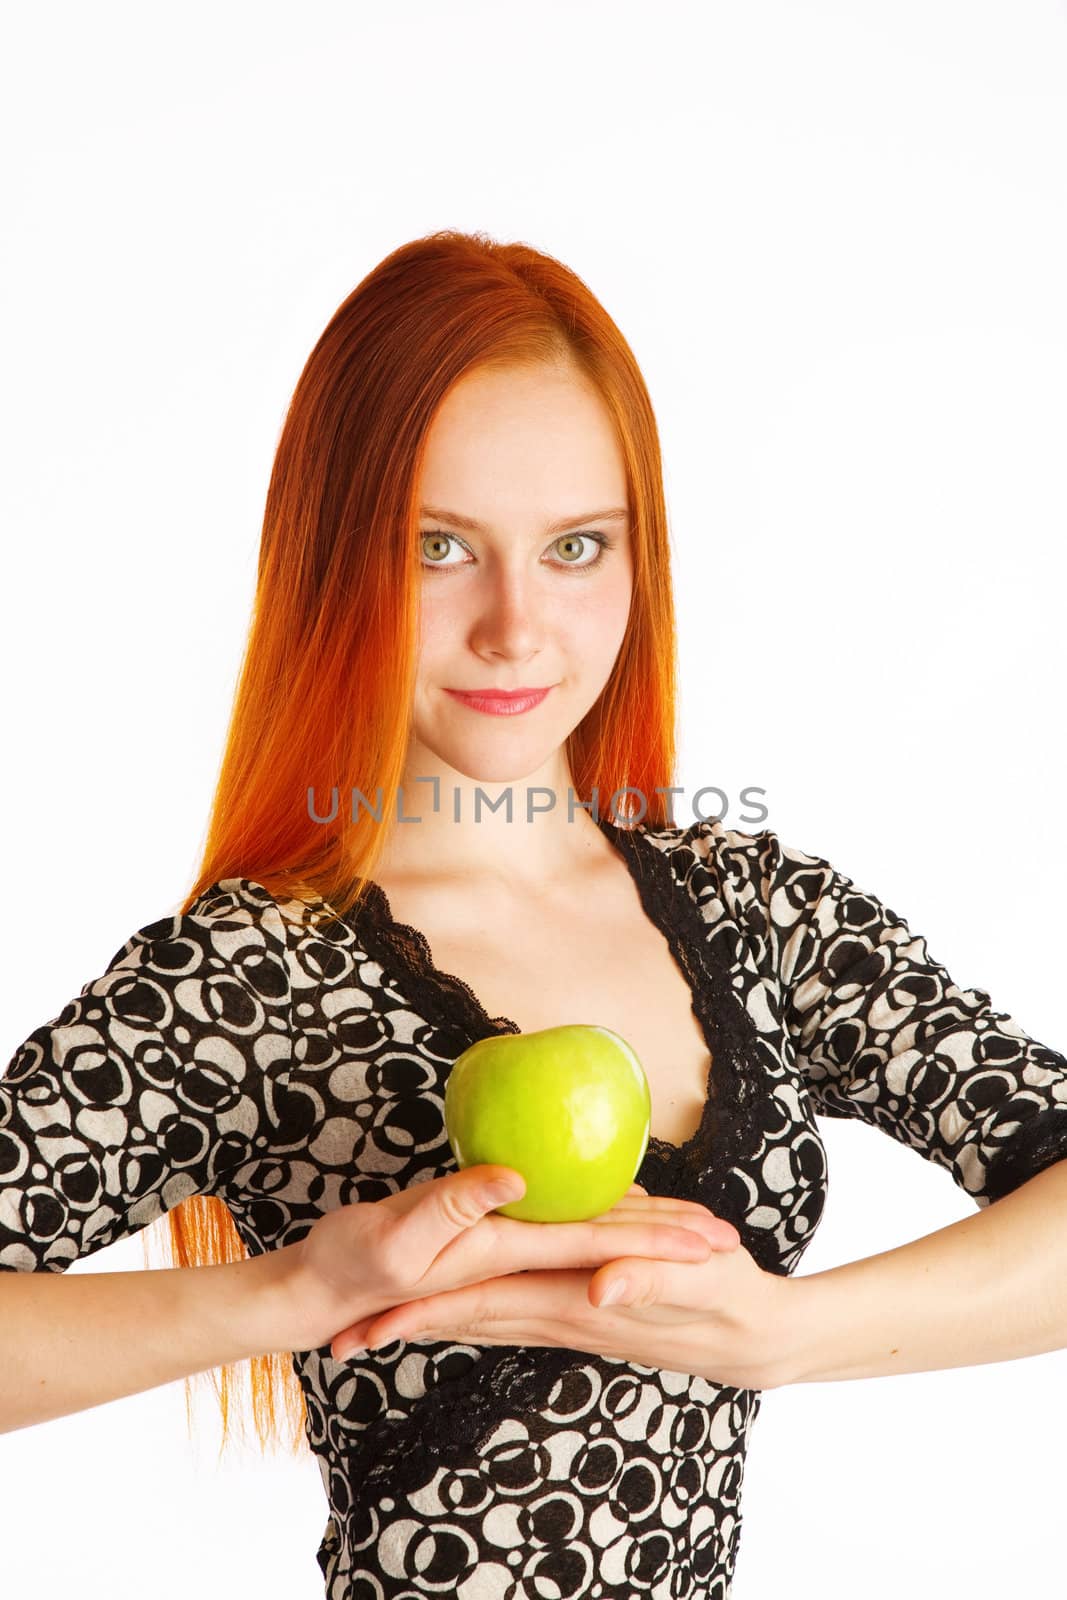 green tasty apple in hands of the girl